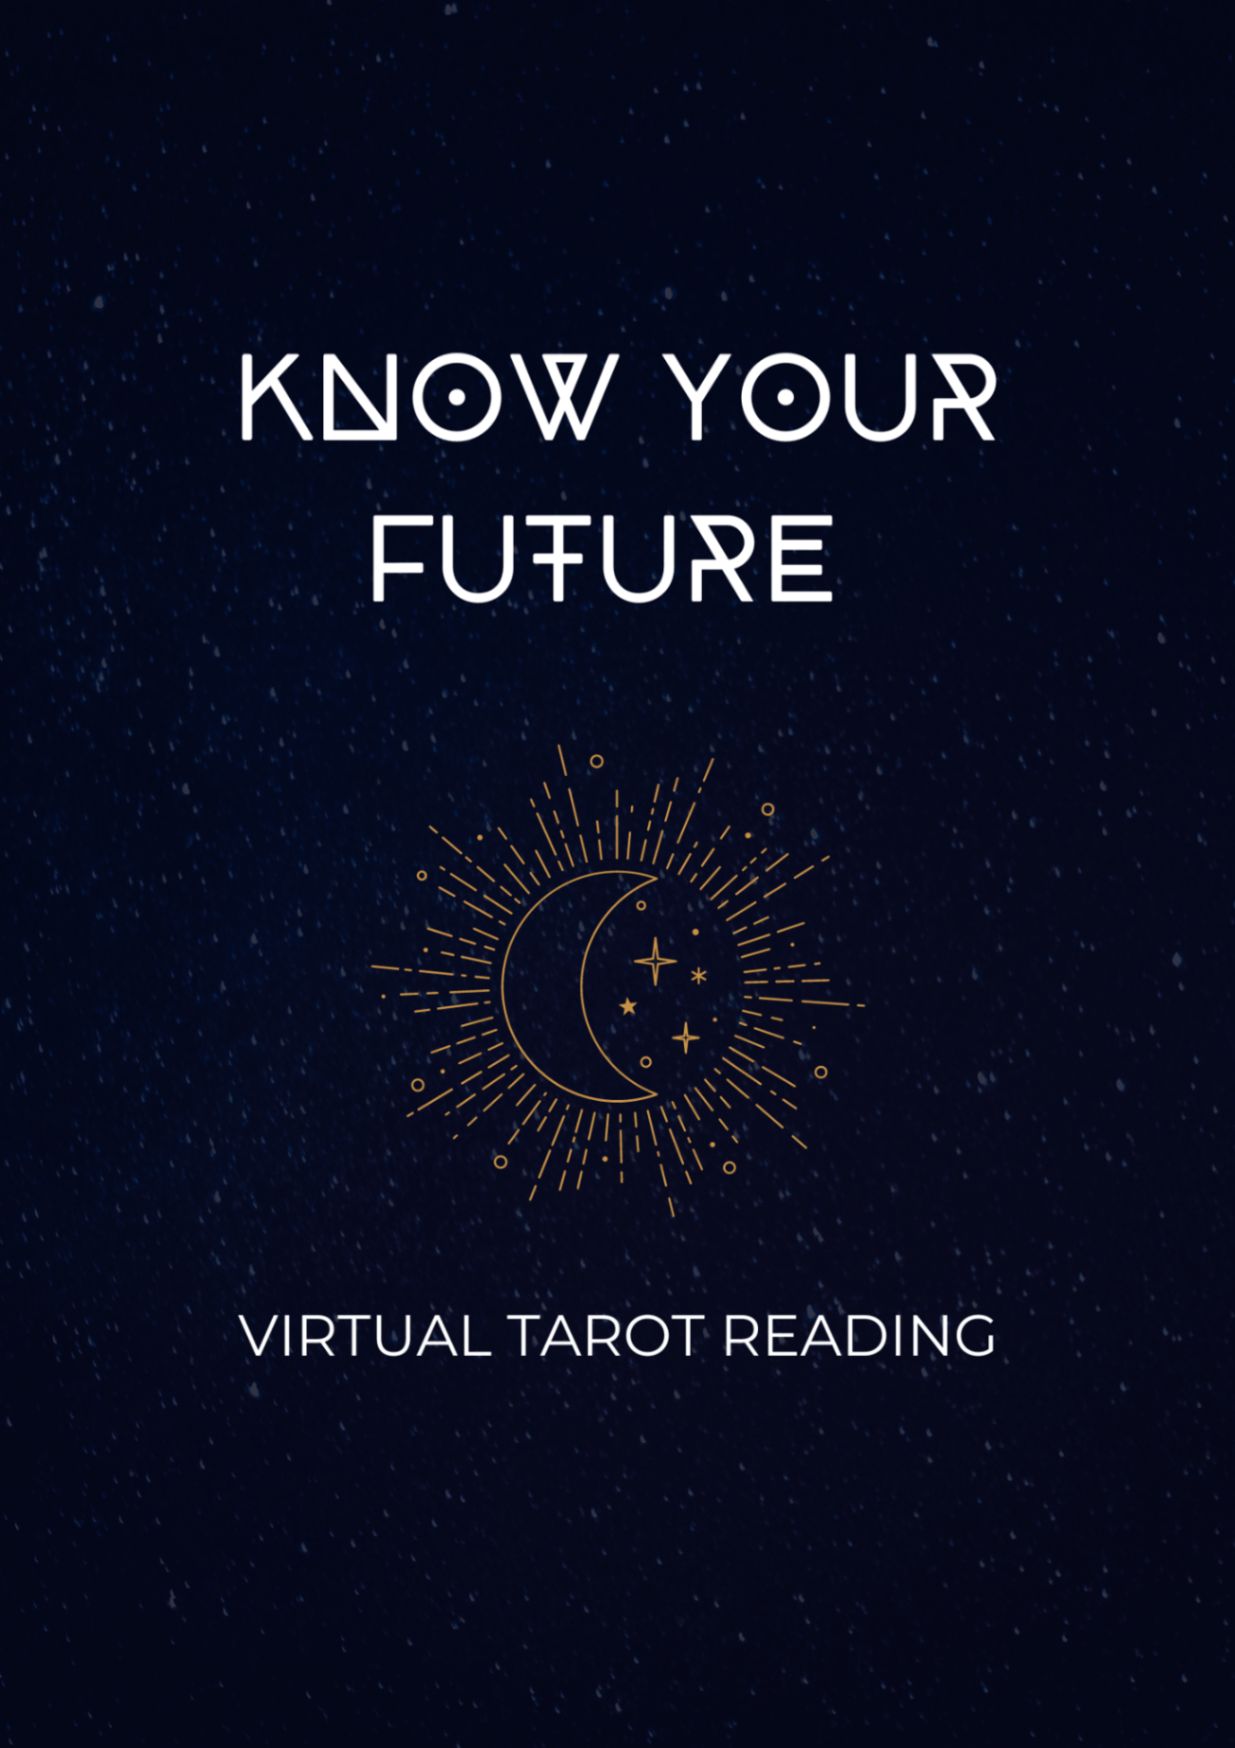 Fortune Telling/ Astrology